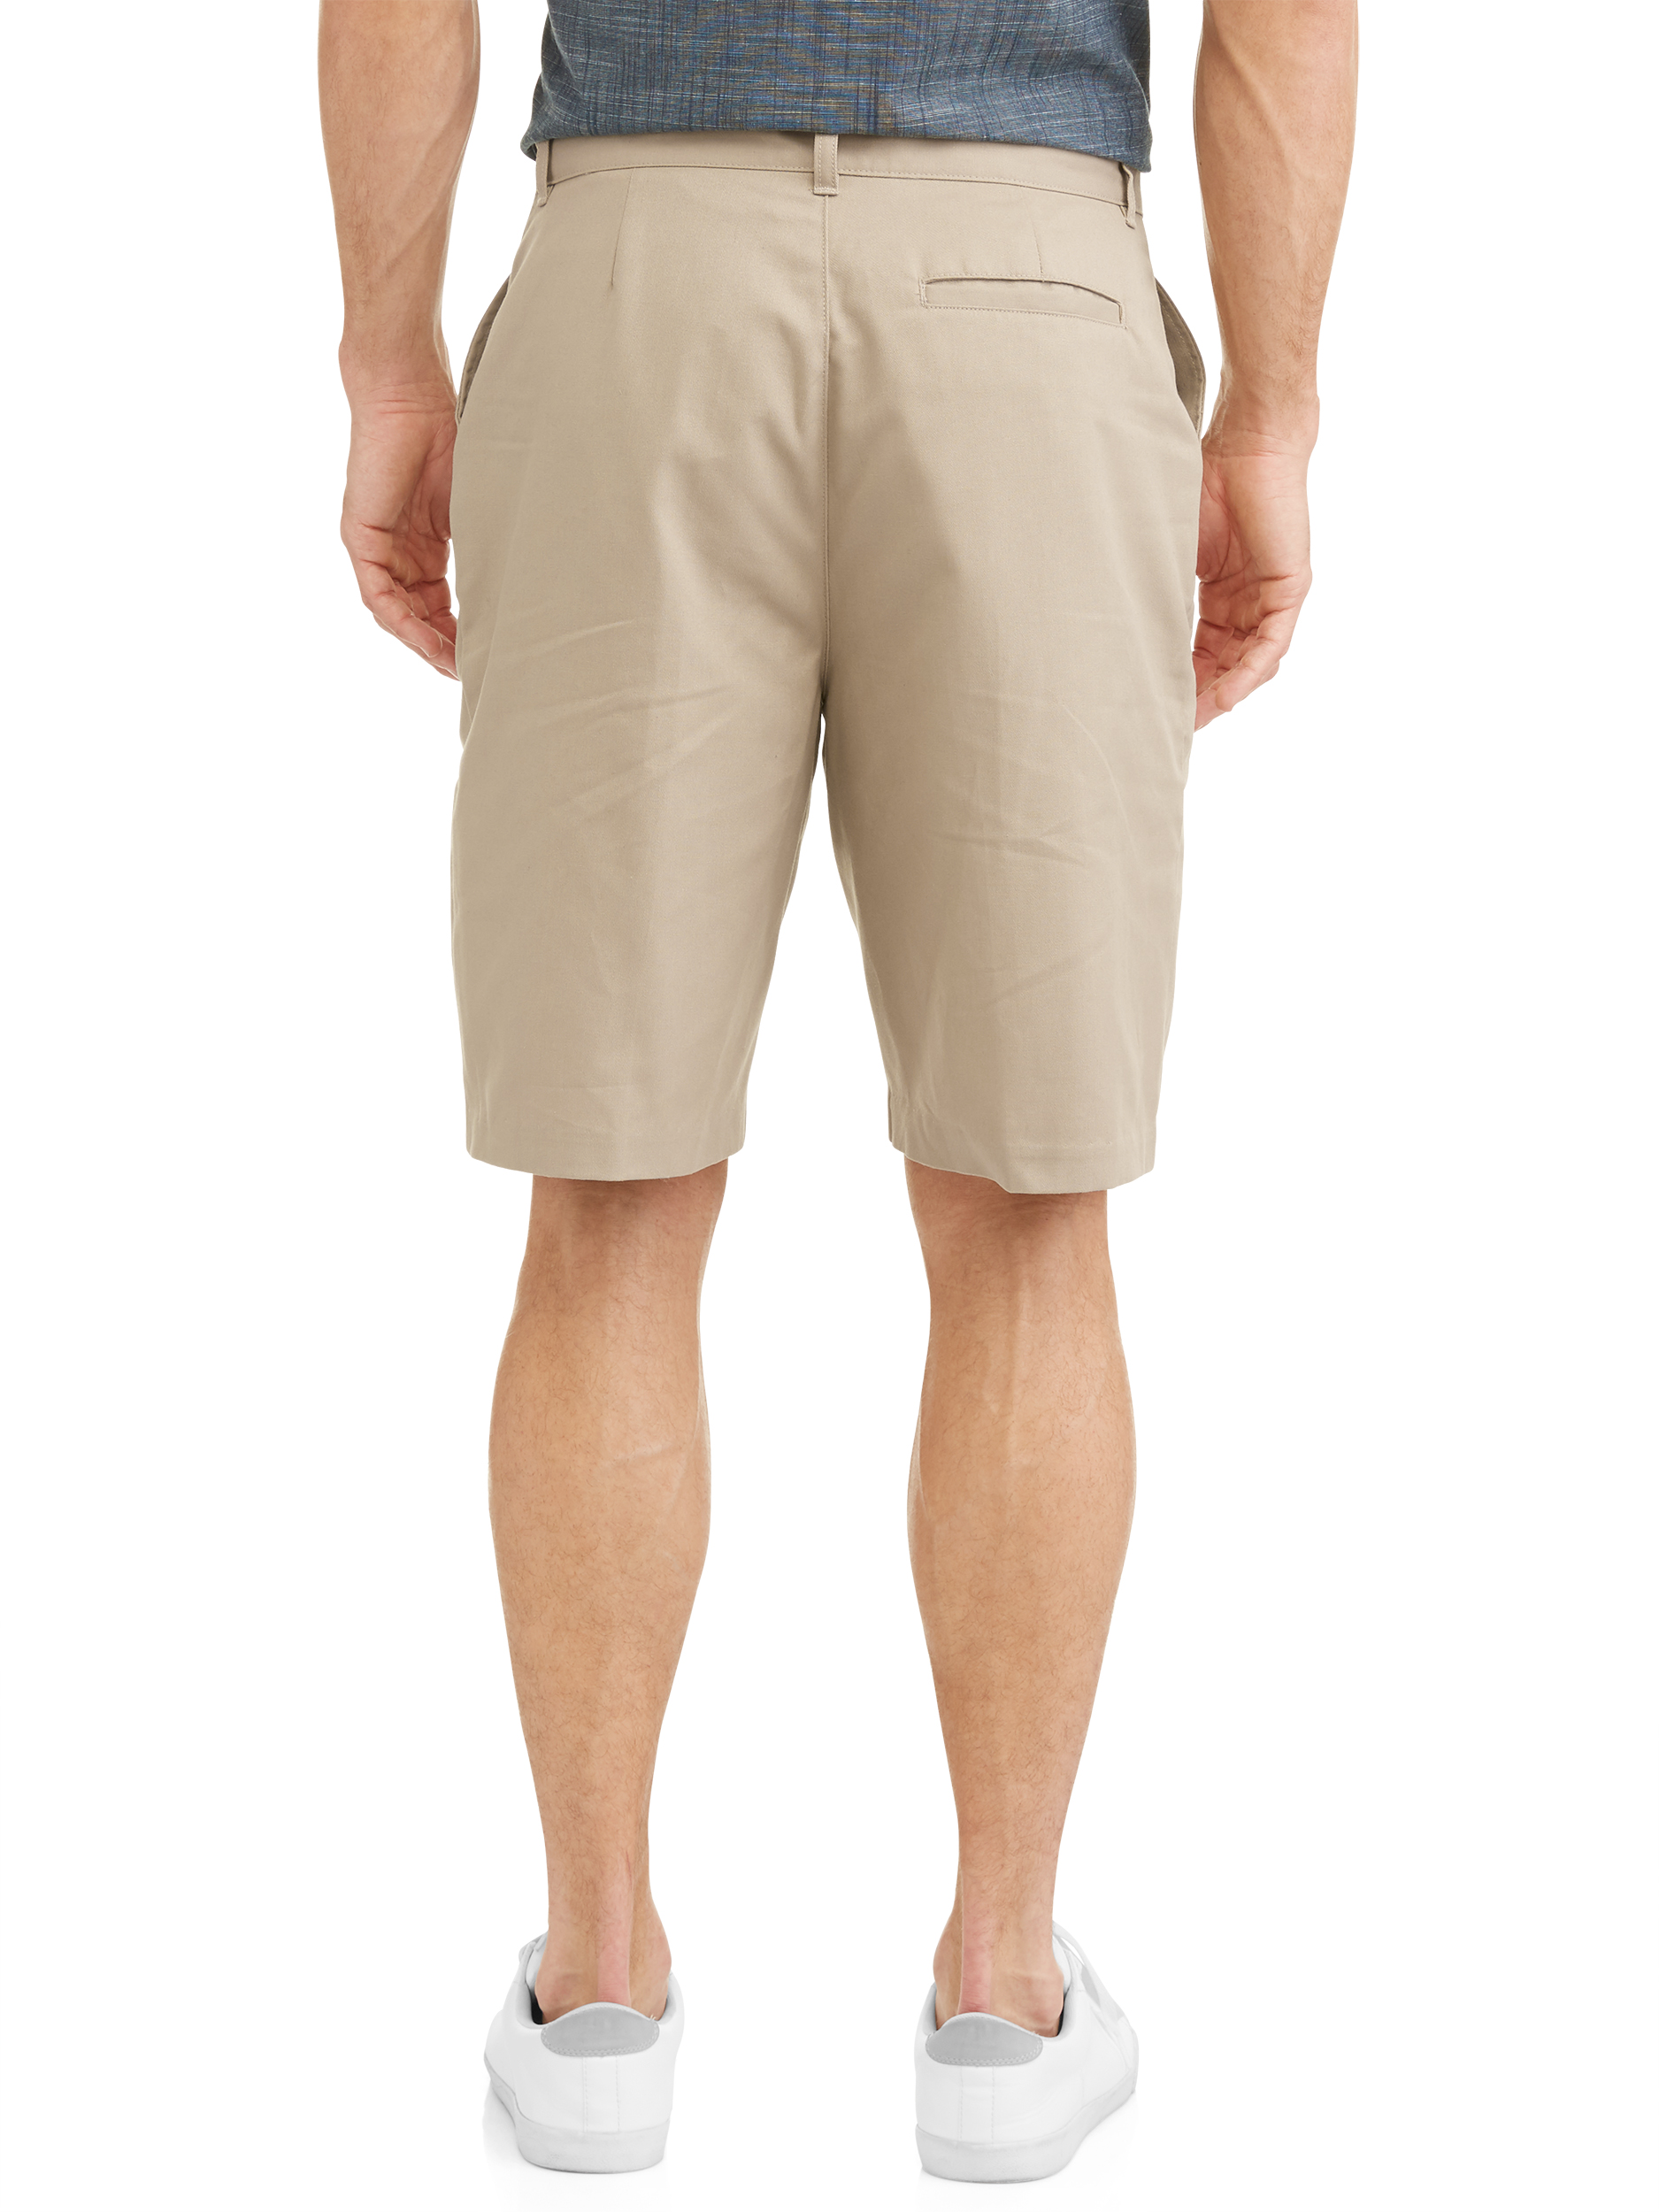 Real School Young Men's 10" Flat Front Short - image 2 of 4